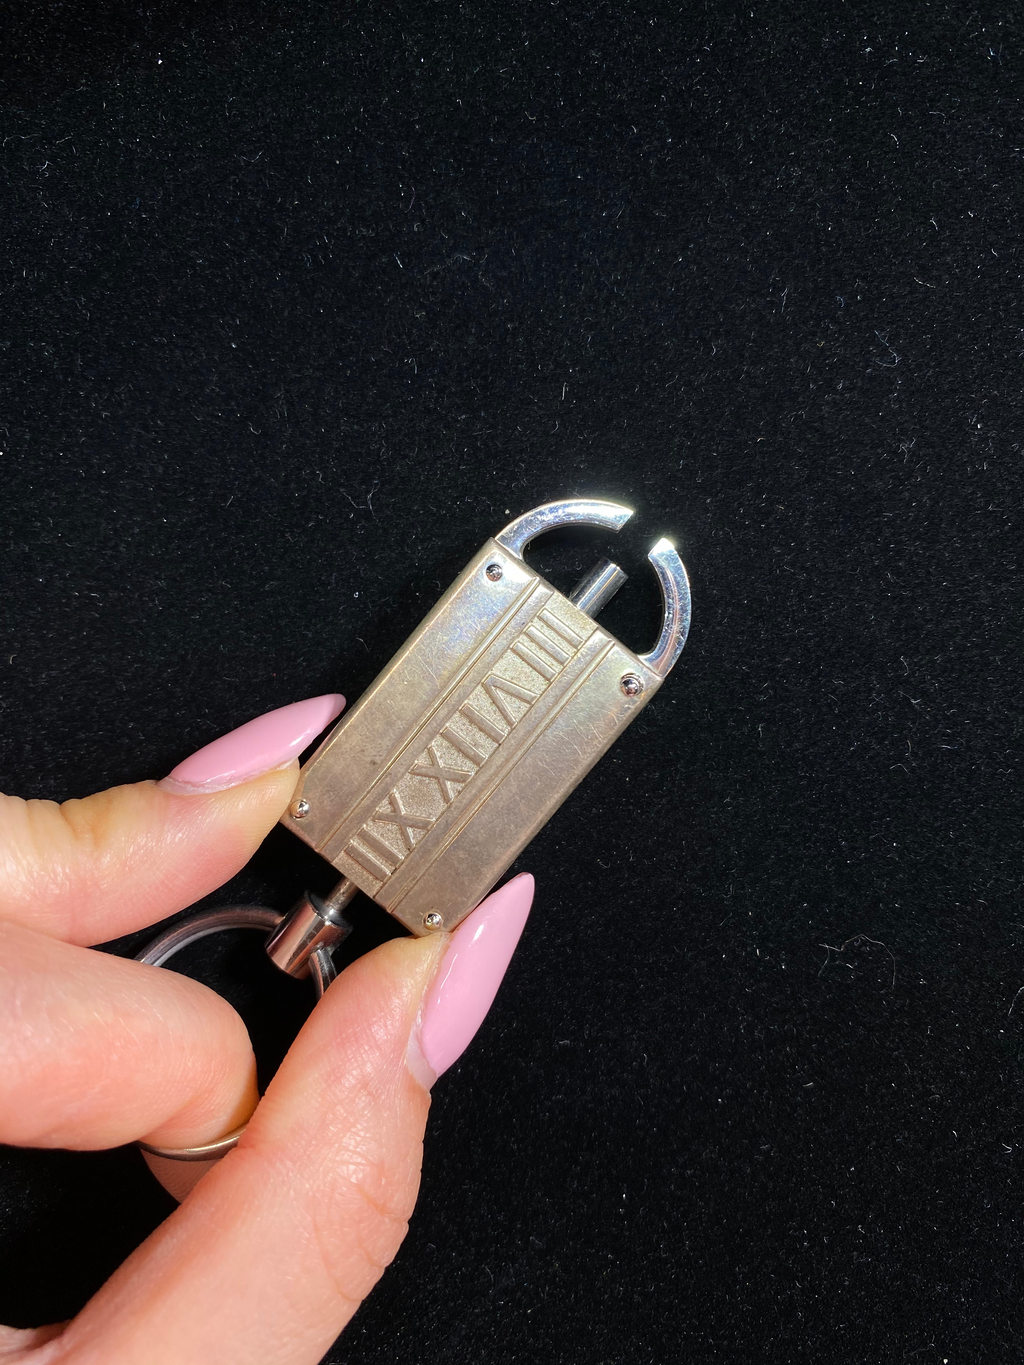 Tiffany 1837 Makers valet key ring in sterling silver and stainless steel.